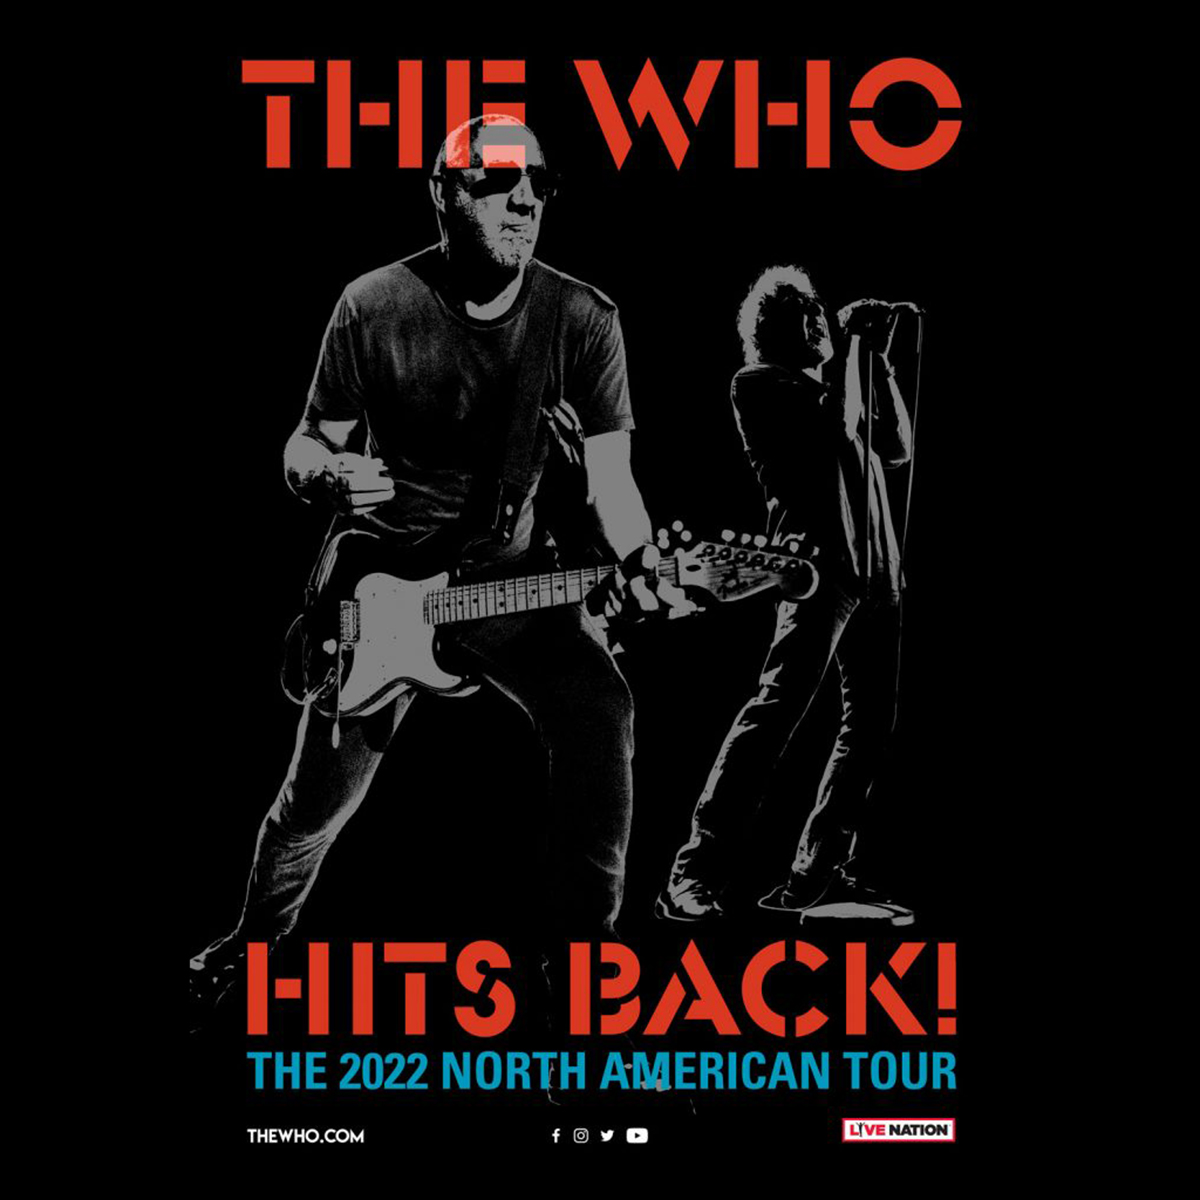 The Who Announces 2022 North American Tour  – The Who Hits Back!